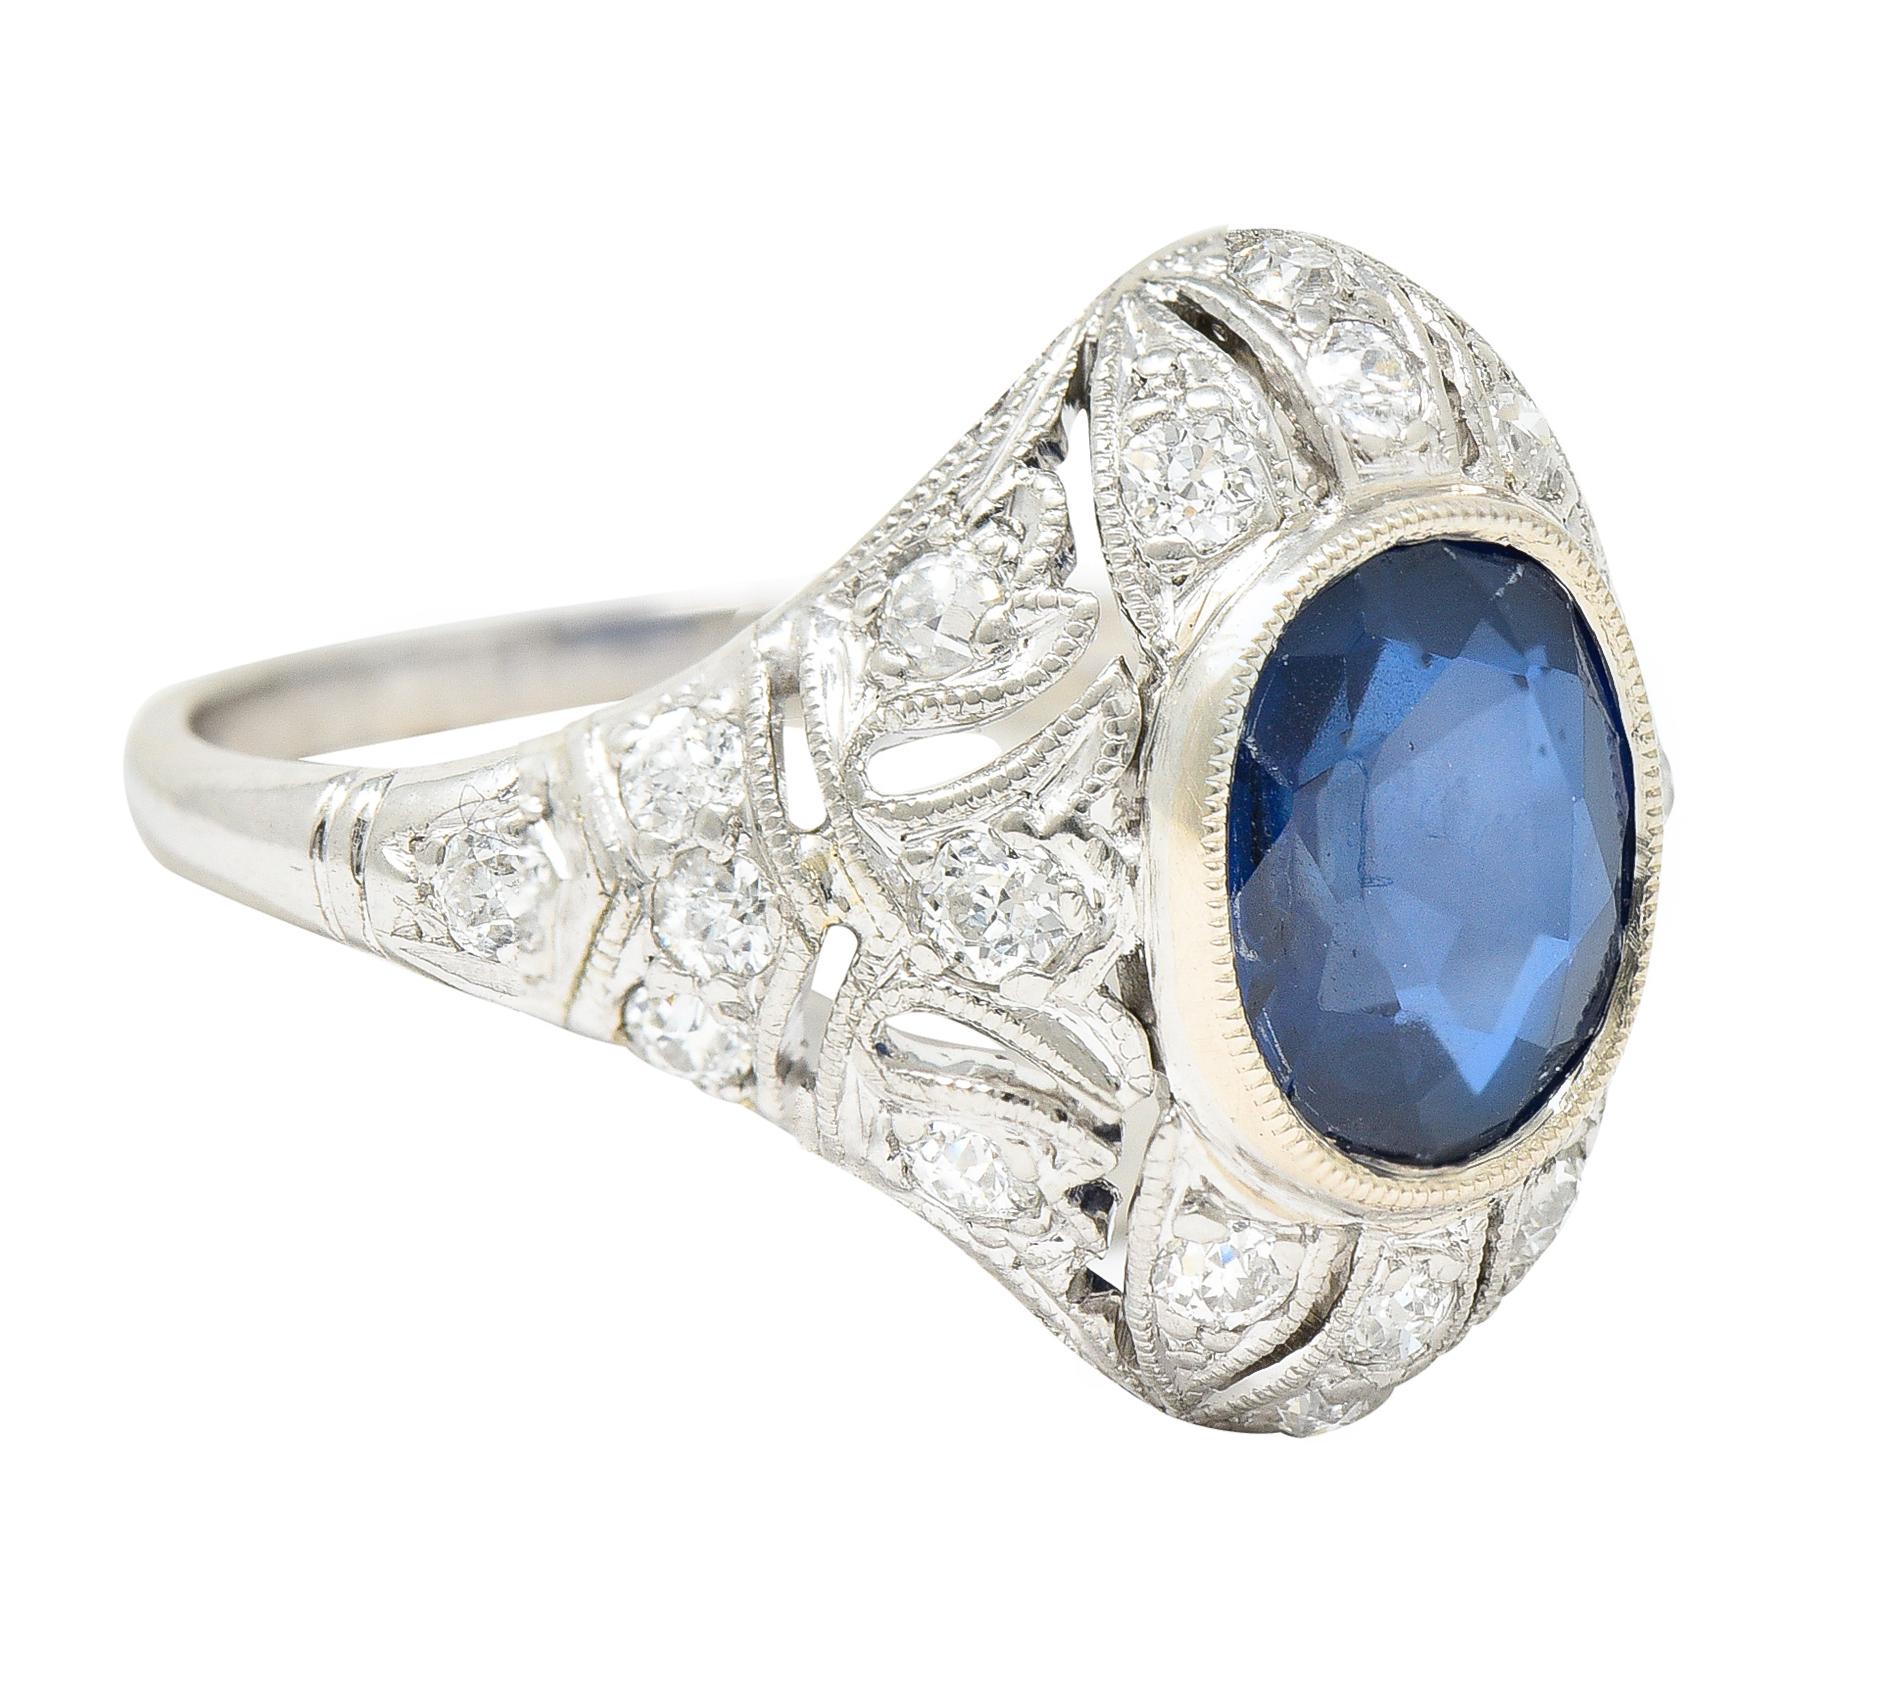 Centering a cushion cut sapphire weighing approximately 1.62 carats total - transparent medium/dark royal blue. Set in a milgrain bezel with a pierced scrolling foliate motif surround with single cut diamonds. Bead set and weighing approximately